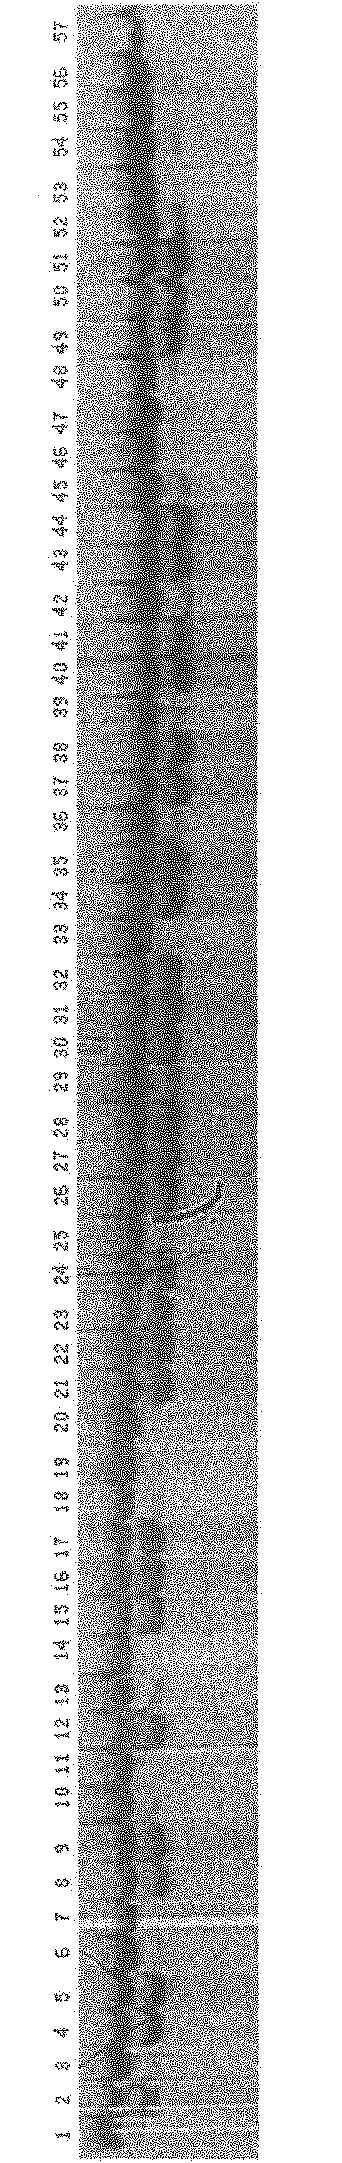 Method for identifying fx151 genetic variation map by using litopenaeus vannamei boone fx151 microsatellite DNA marker